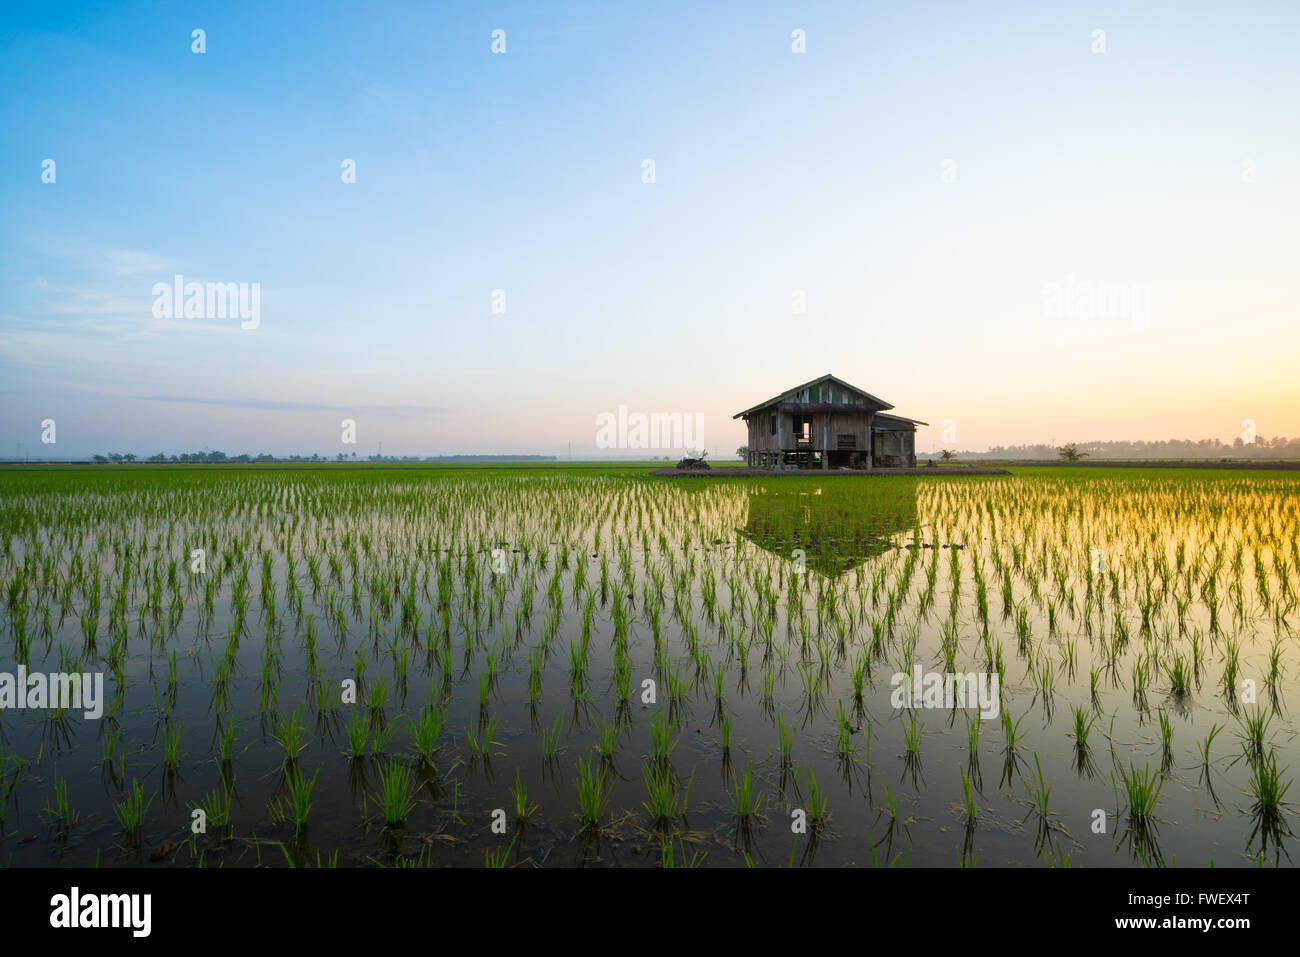 Abandoned wooden house in middle of paddy field with a sunrise sky in the background. Stock Photo